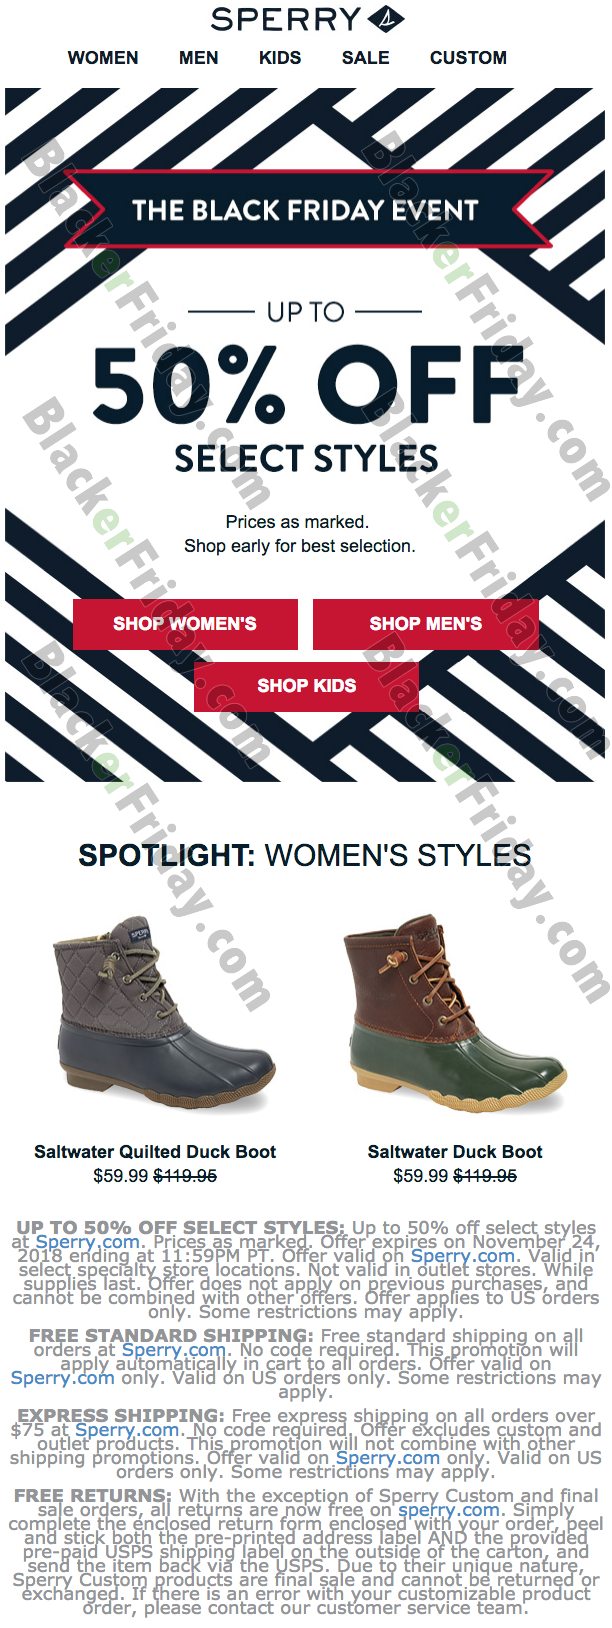 Sperry Black Friday 2020 Sale - What to 